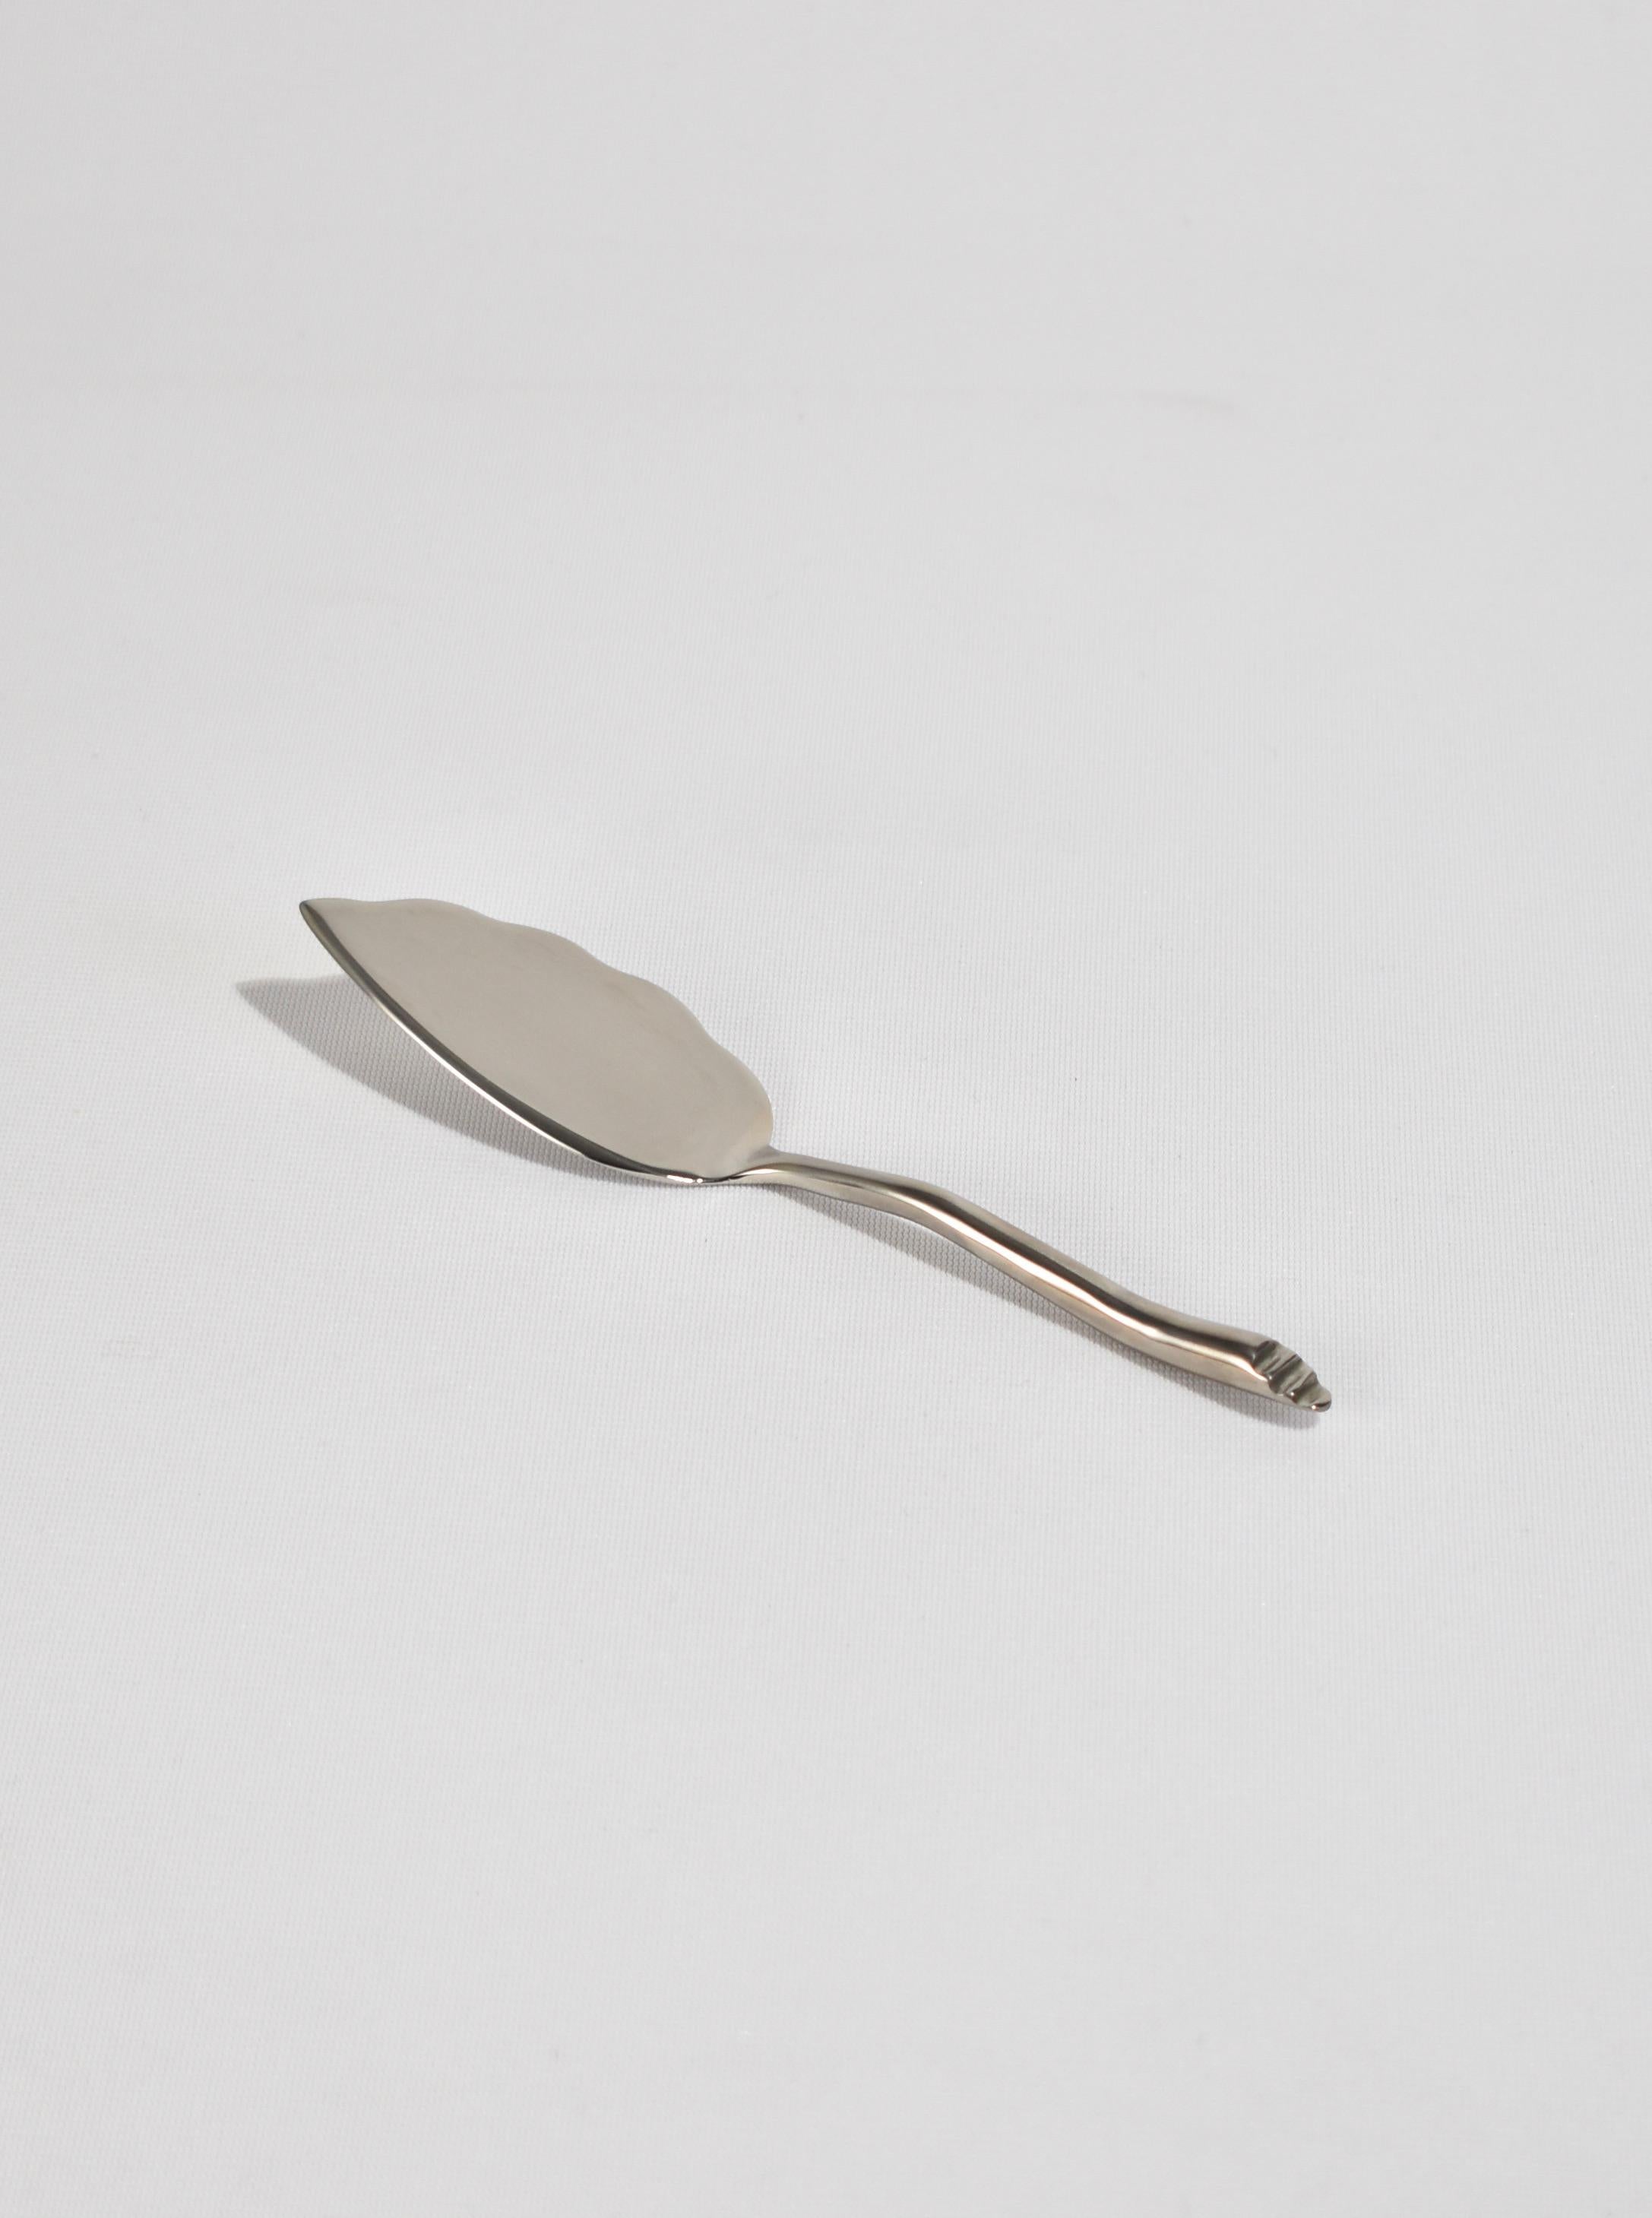 Beautiful, silver-plated cheese server in the 'Shore' pattern. Each piece is hand-forged and features an undulating handle with angled end. Impressed above end 'IZABEL LAM'.

Designed in the late 1980s by Izabel Lam.